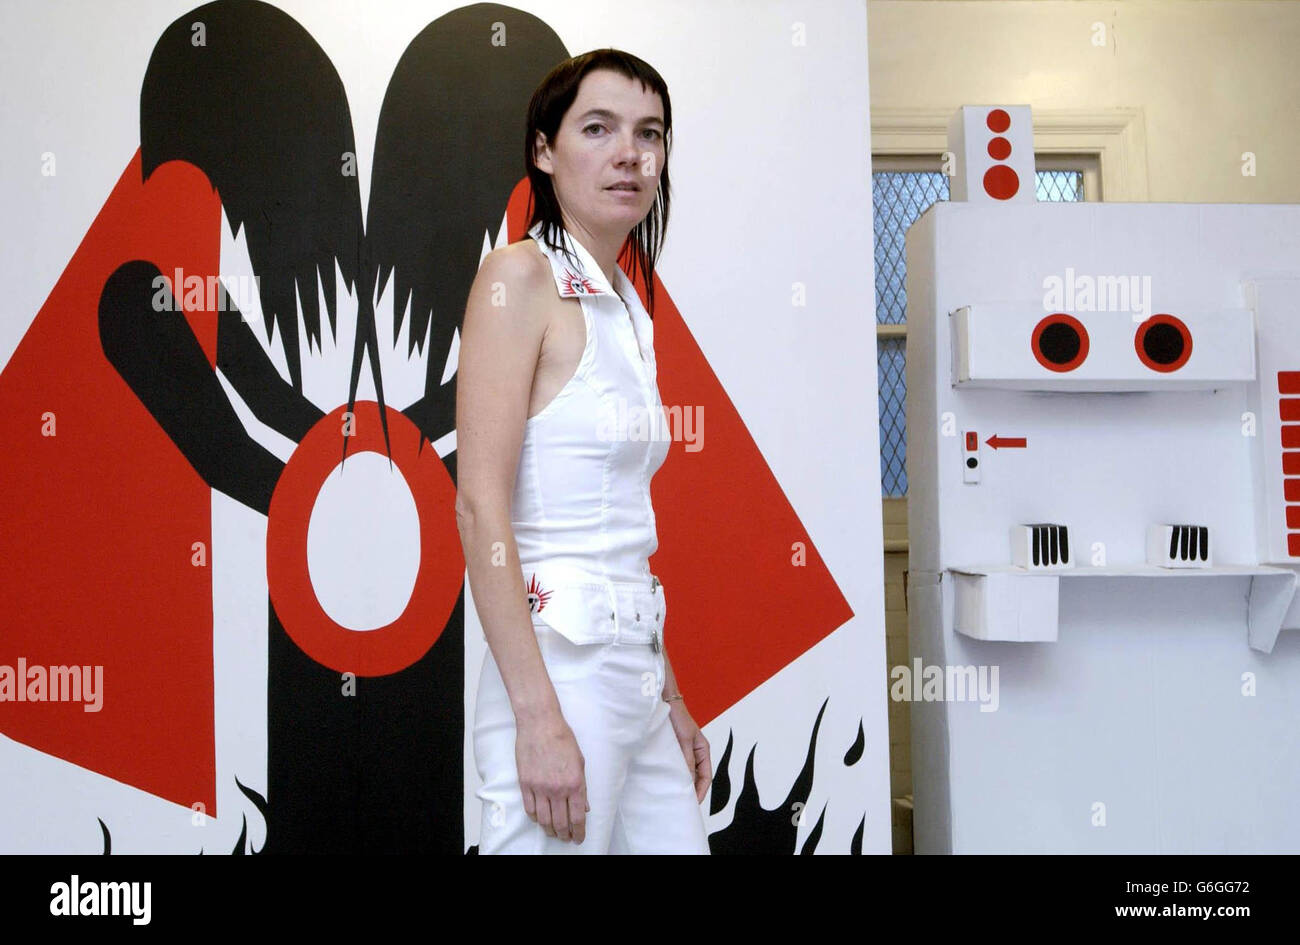 Artist Antoinette Hachler showcases her exhibition at the opening of the Toilet Gallery in Kingston, central London. The converted public convenience will exhibit film, video and performance art, and is set to become an important showcase for young British artists. Stock Photo